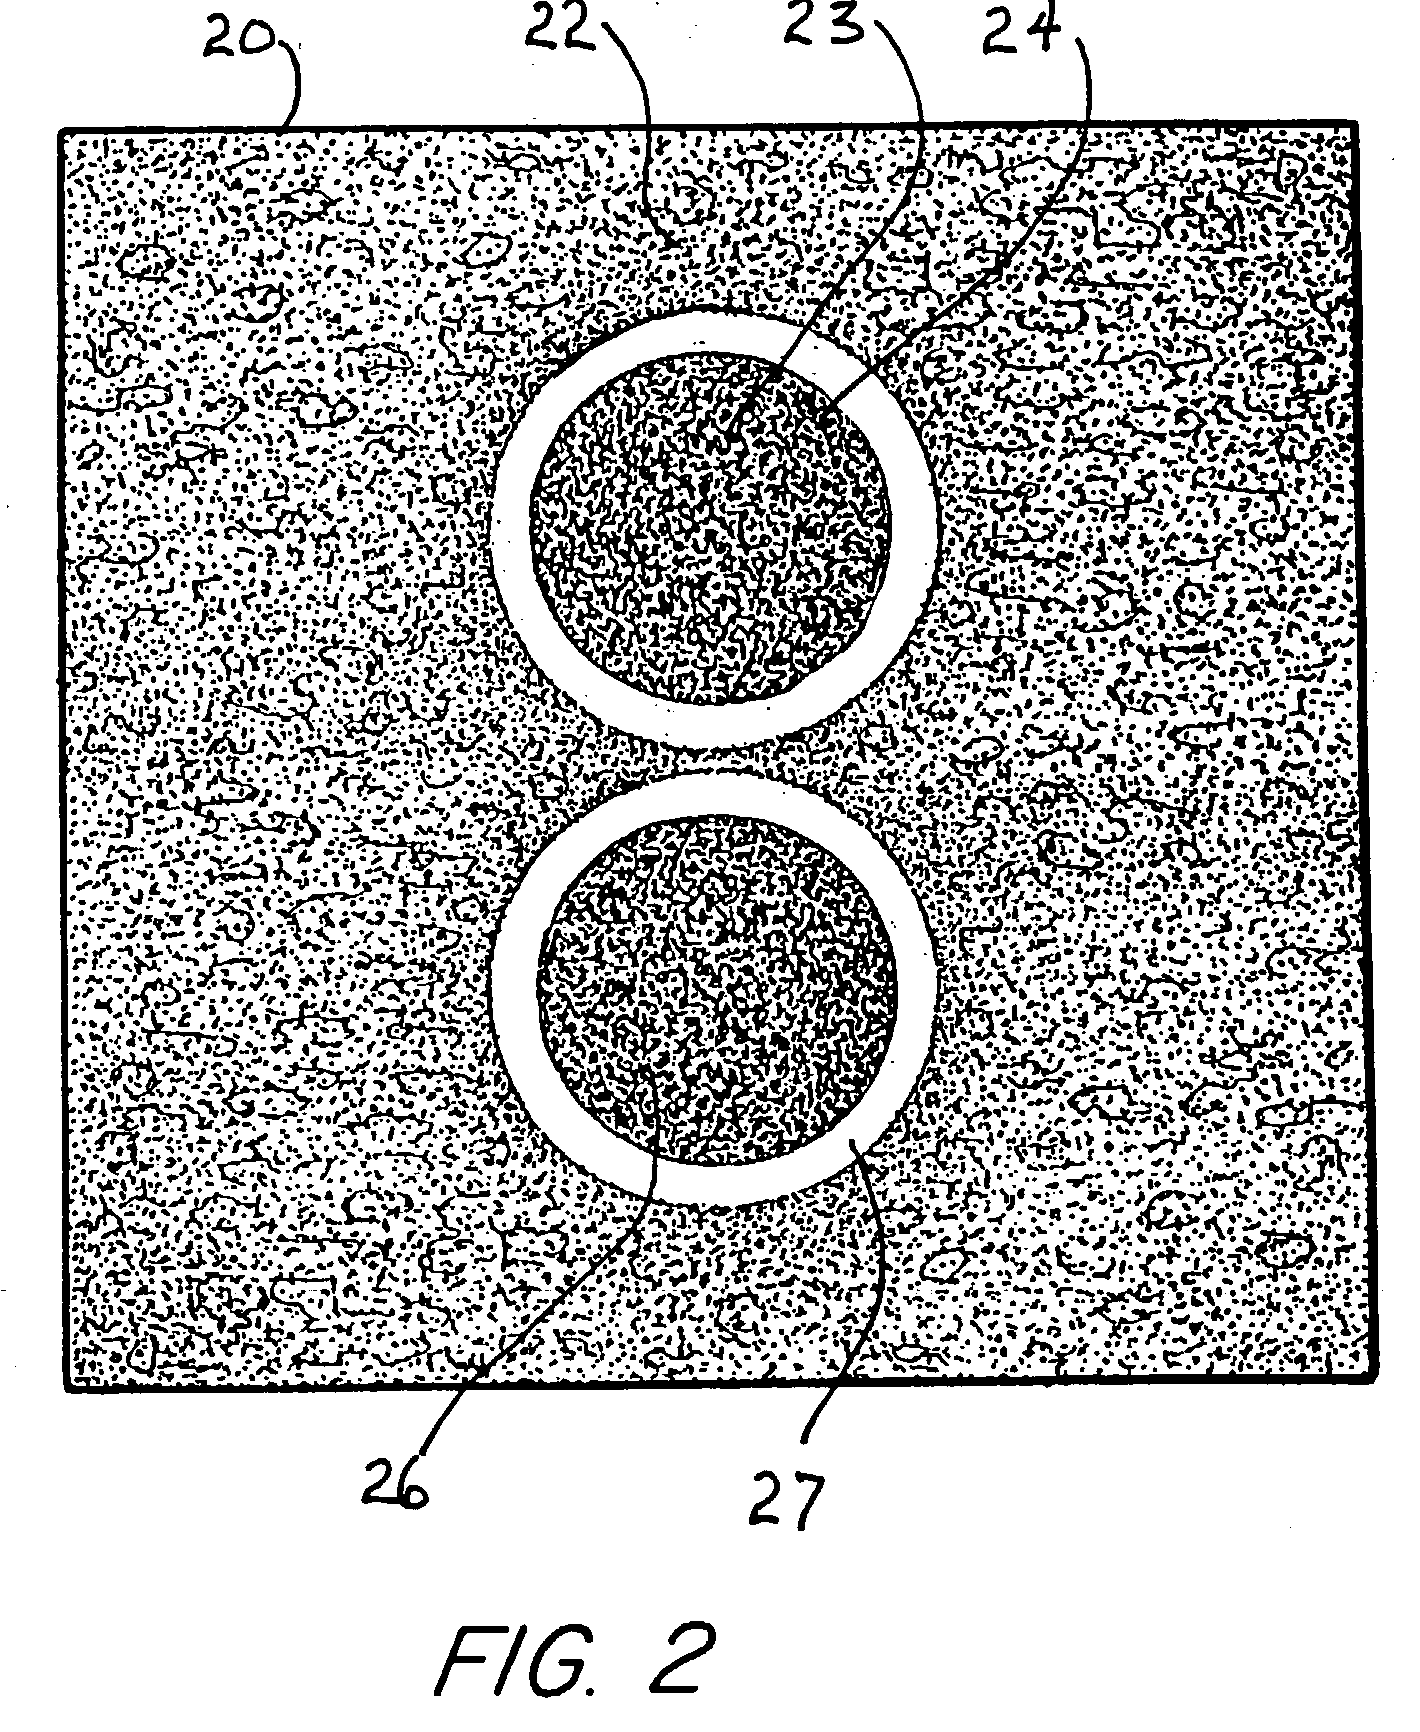 System and method for improving ultrasound image acquisition and replication for repeatable measurements of vascular structures